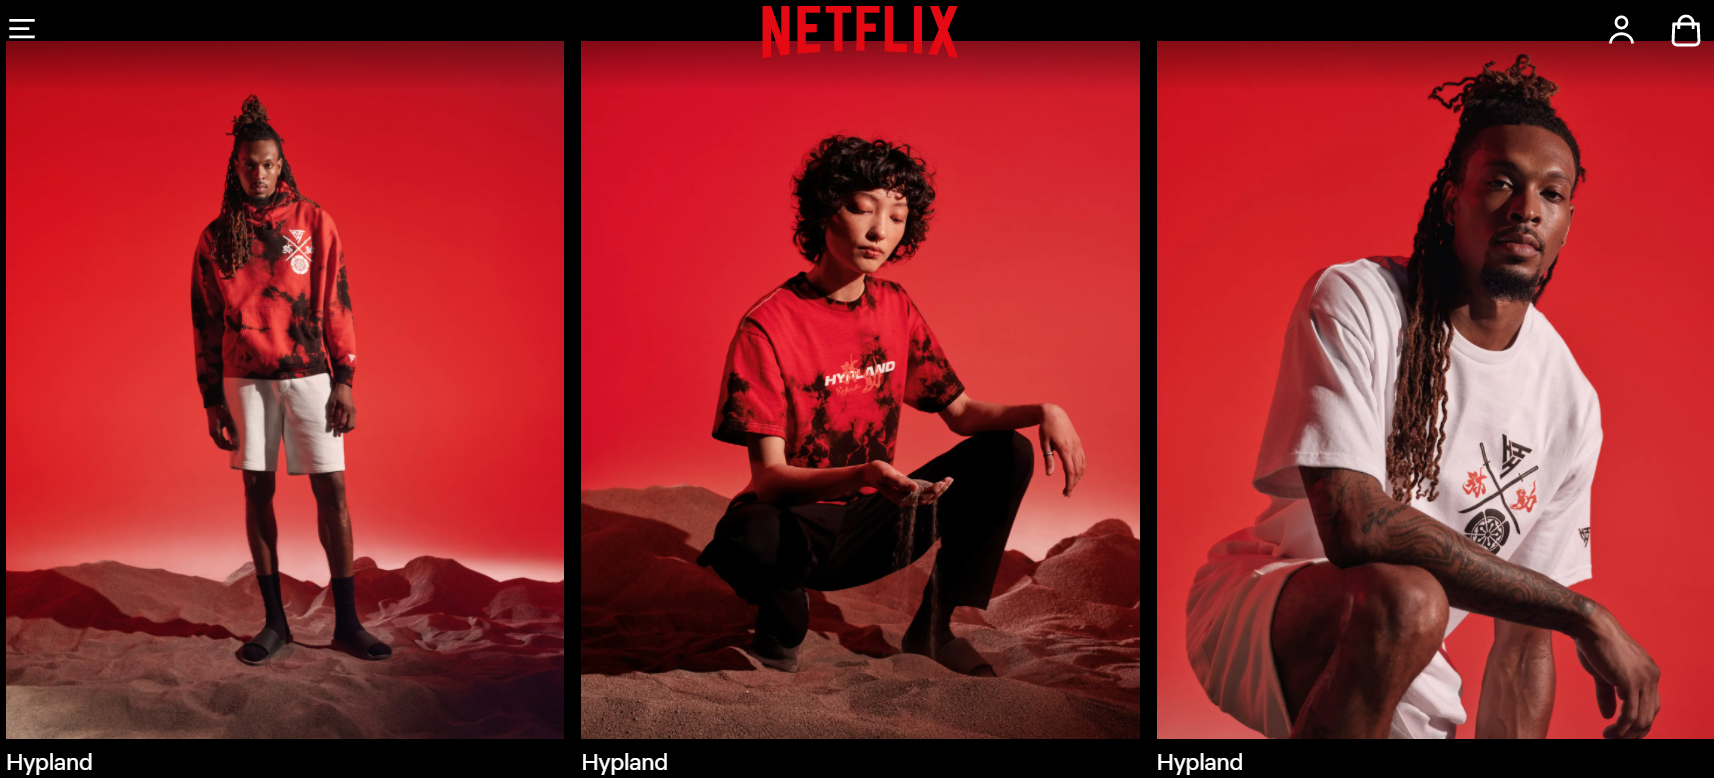 Netflix Turns E-commerce Selling Merchandise of its Most Popular Shows